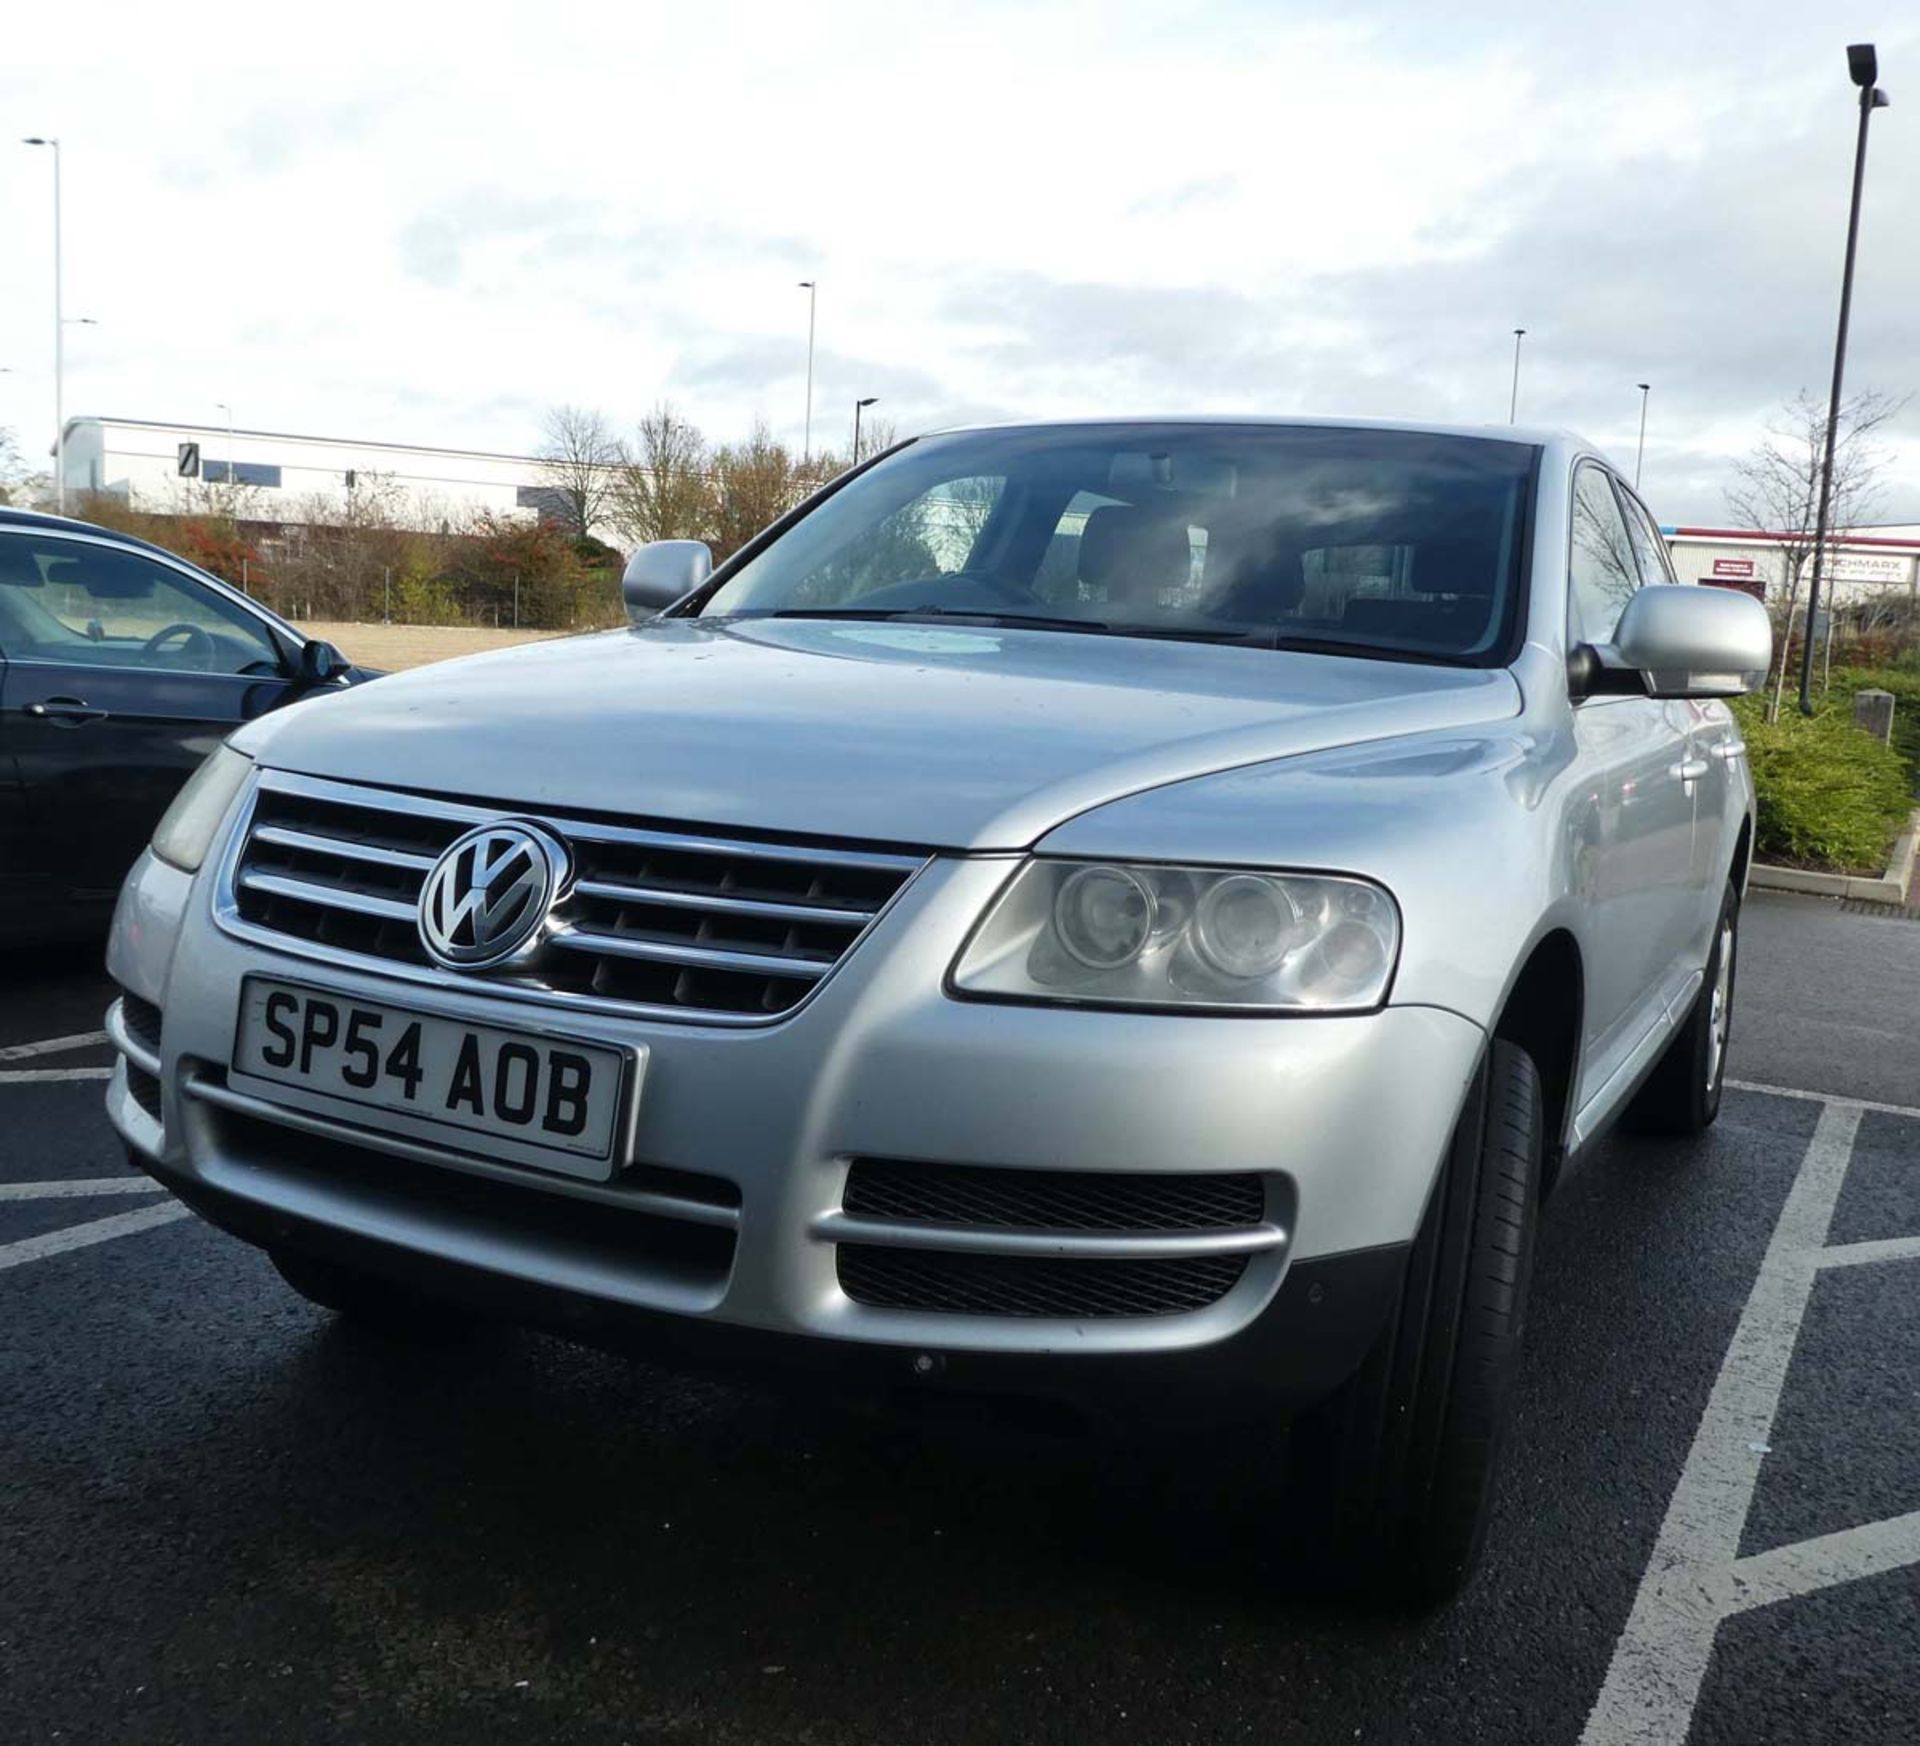 SP54 AOB (2004) Volkswagen Estate Touareg TDI in silver, 2461cc, diesel, 3 former keepers, 1 key, - Image 6 of 12